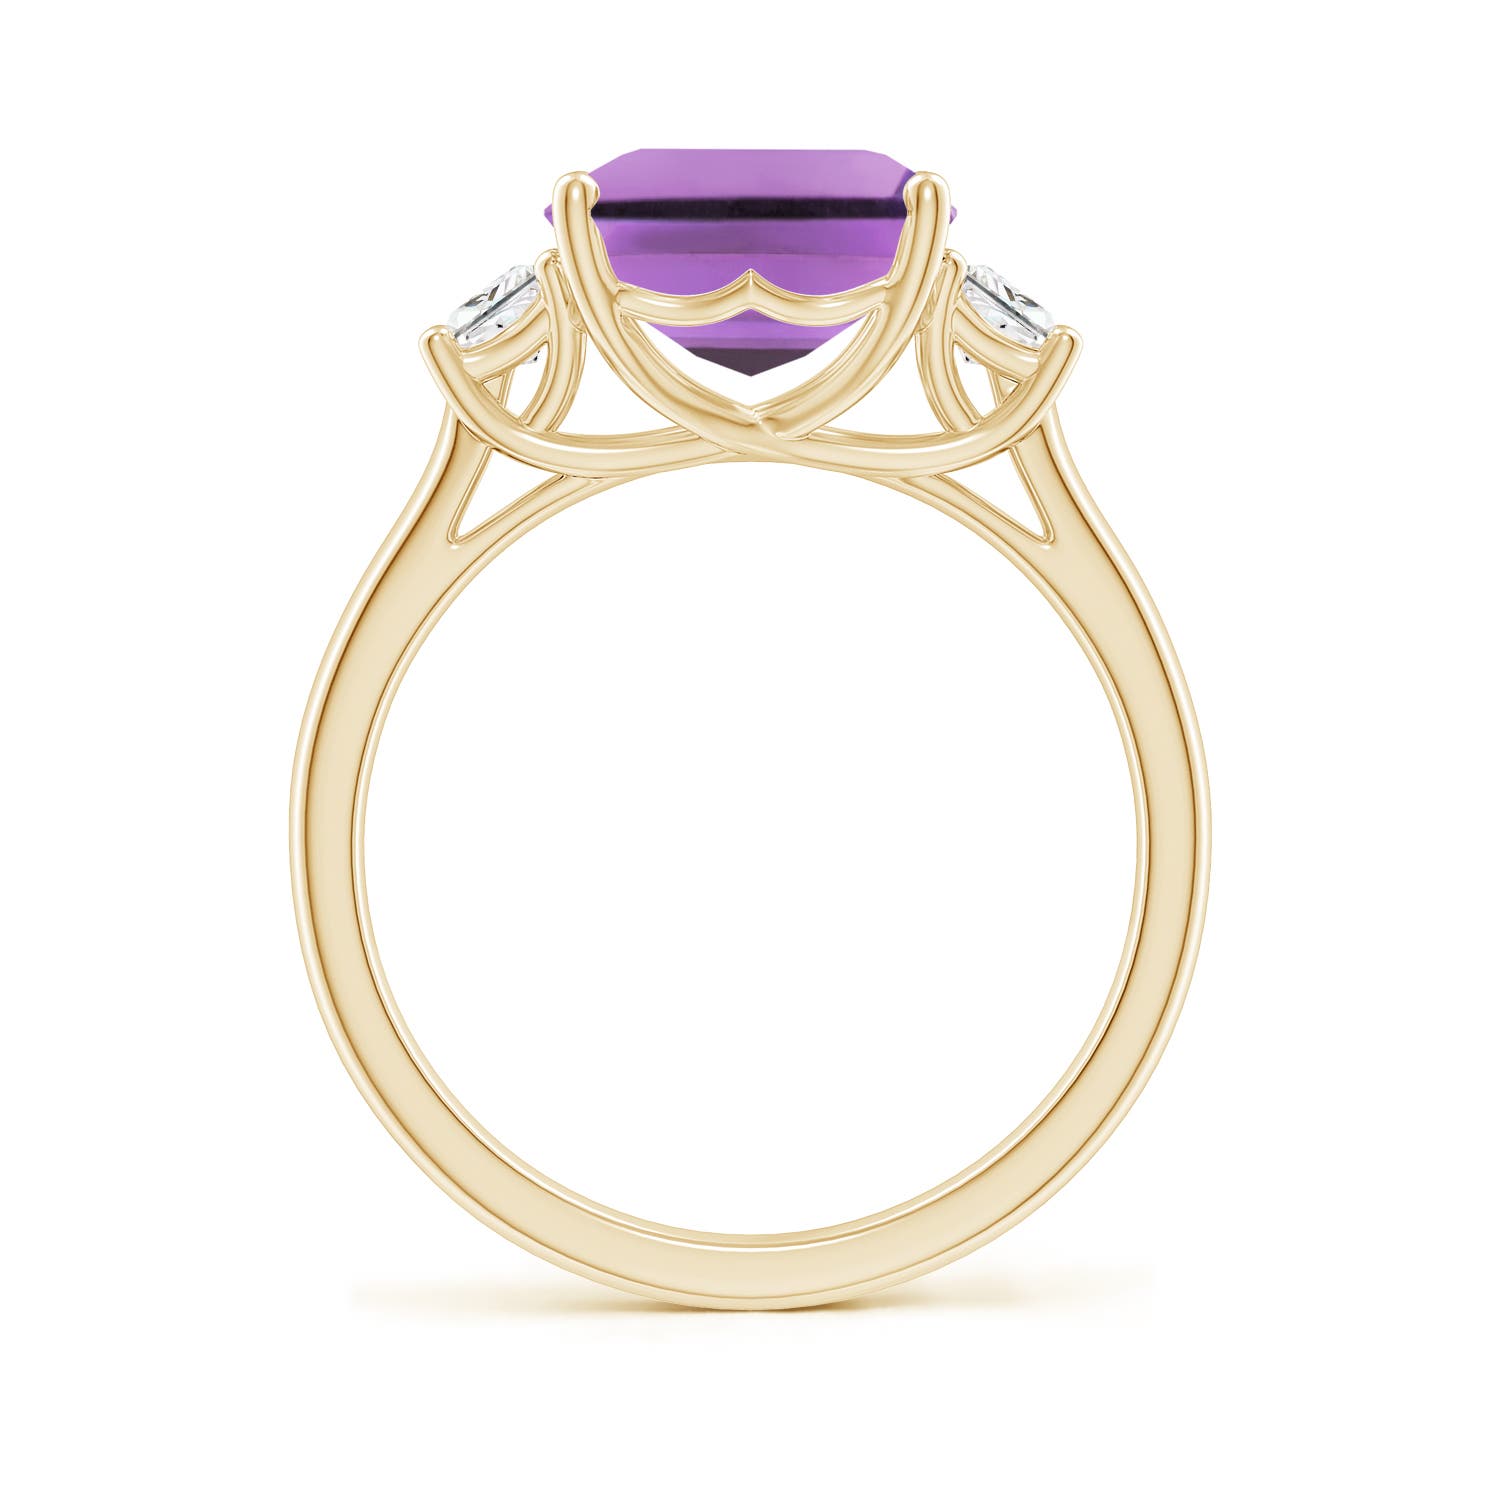 A- Amethyst / 4.32 CT / 14 KT Yellow Gold